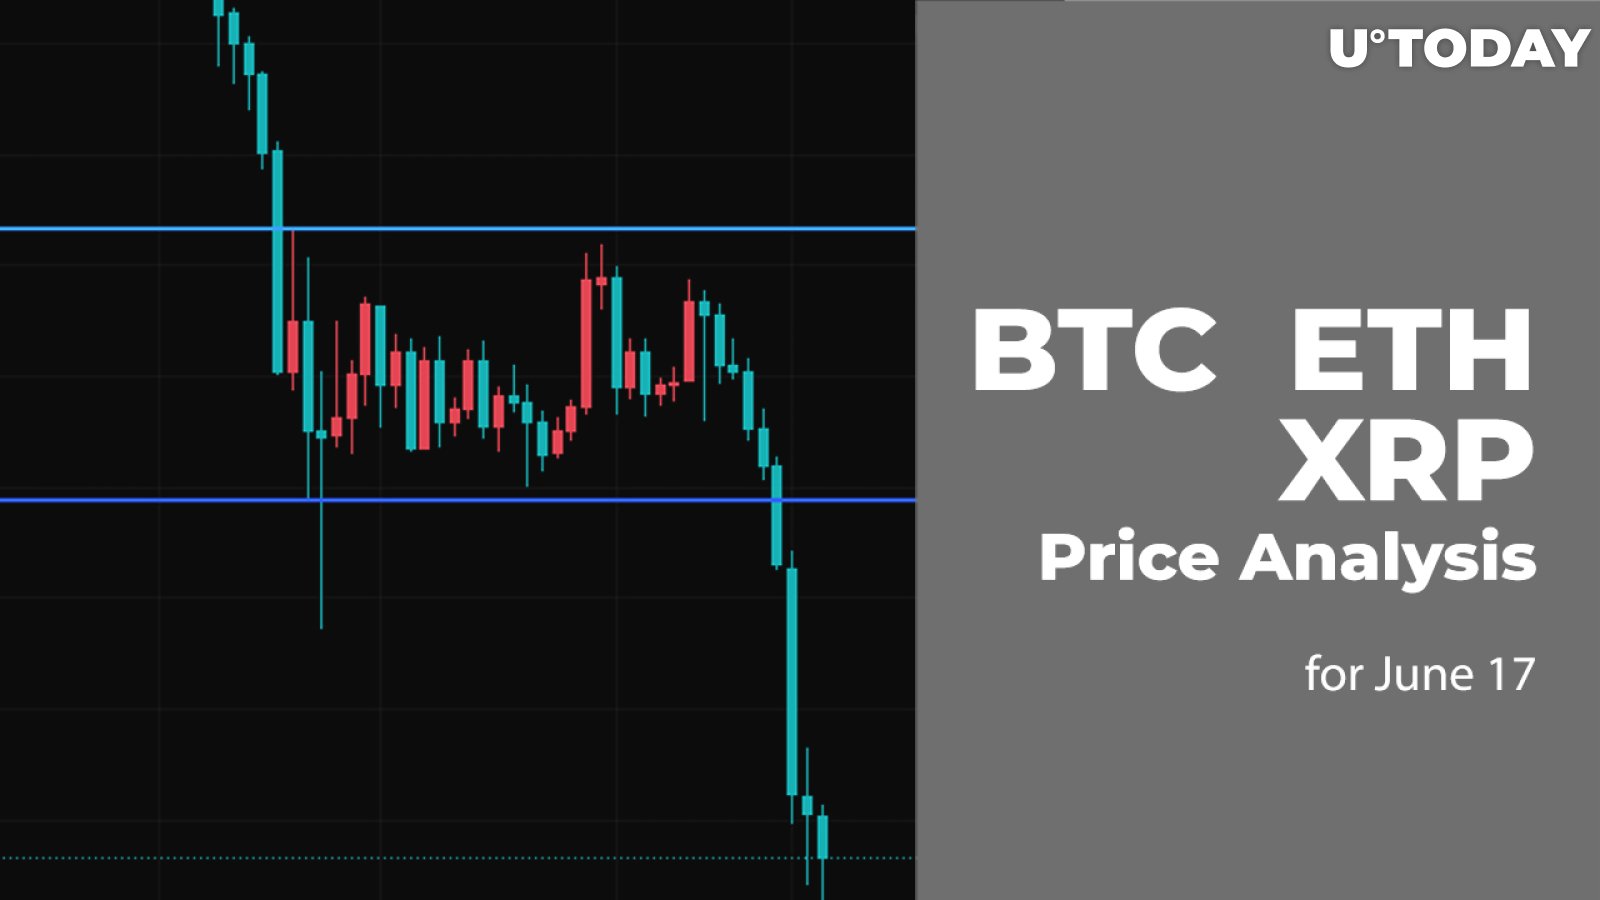 BTC, ETH and XRP Price Analysis for June 17